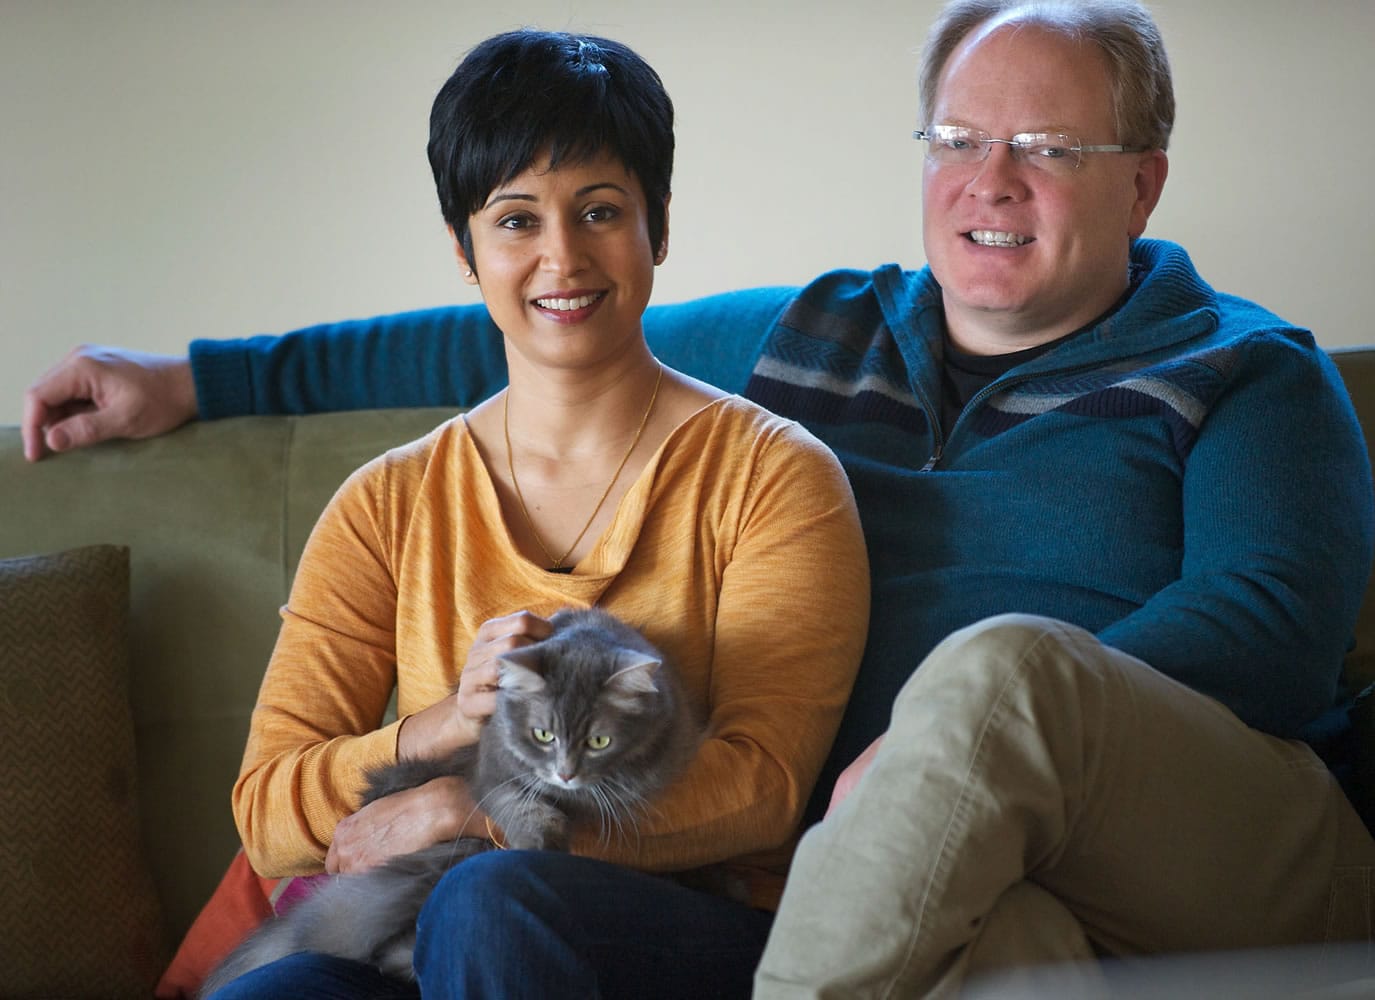 David Gregerson and his wife, Maya Bhat-Gregerson, with their cat, Lola.